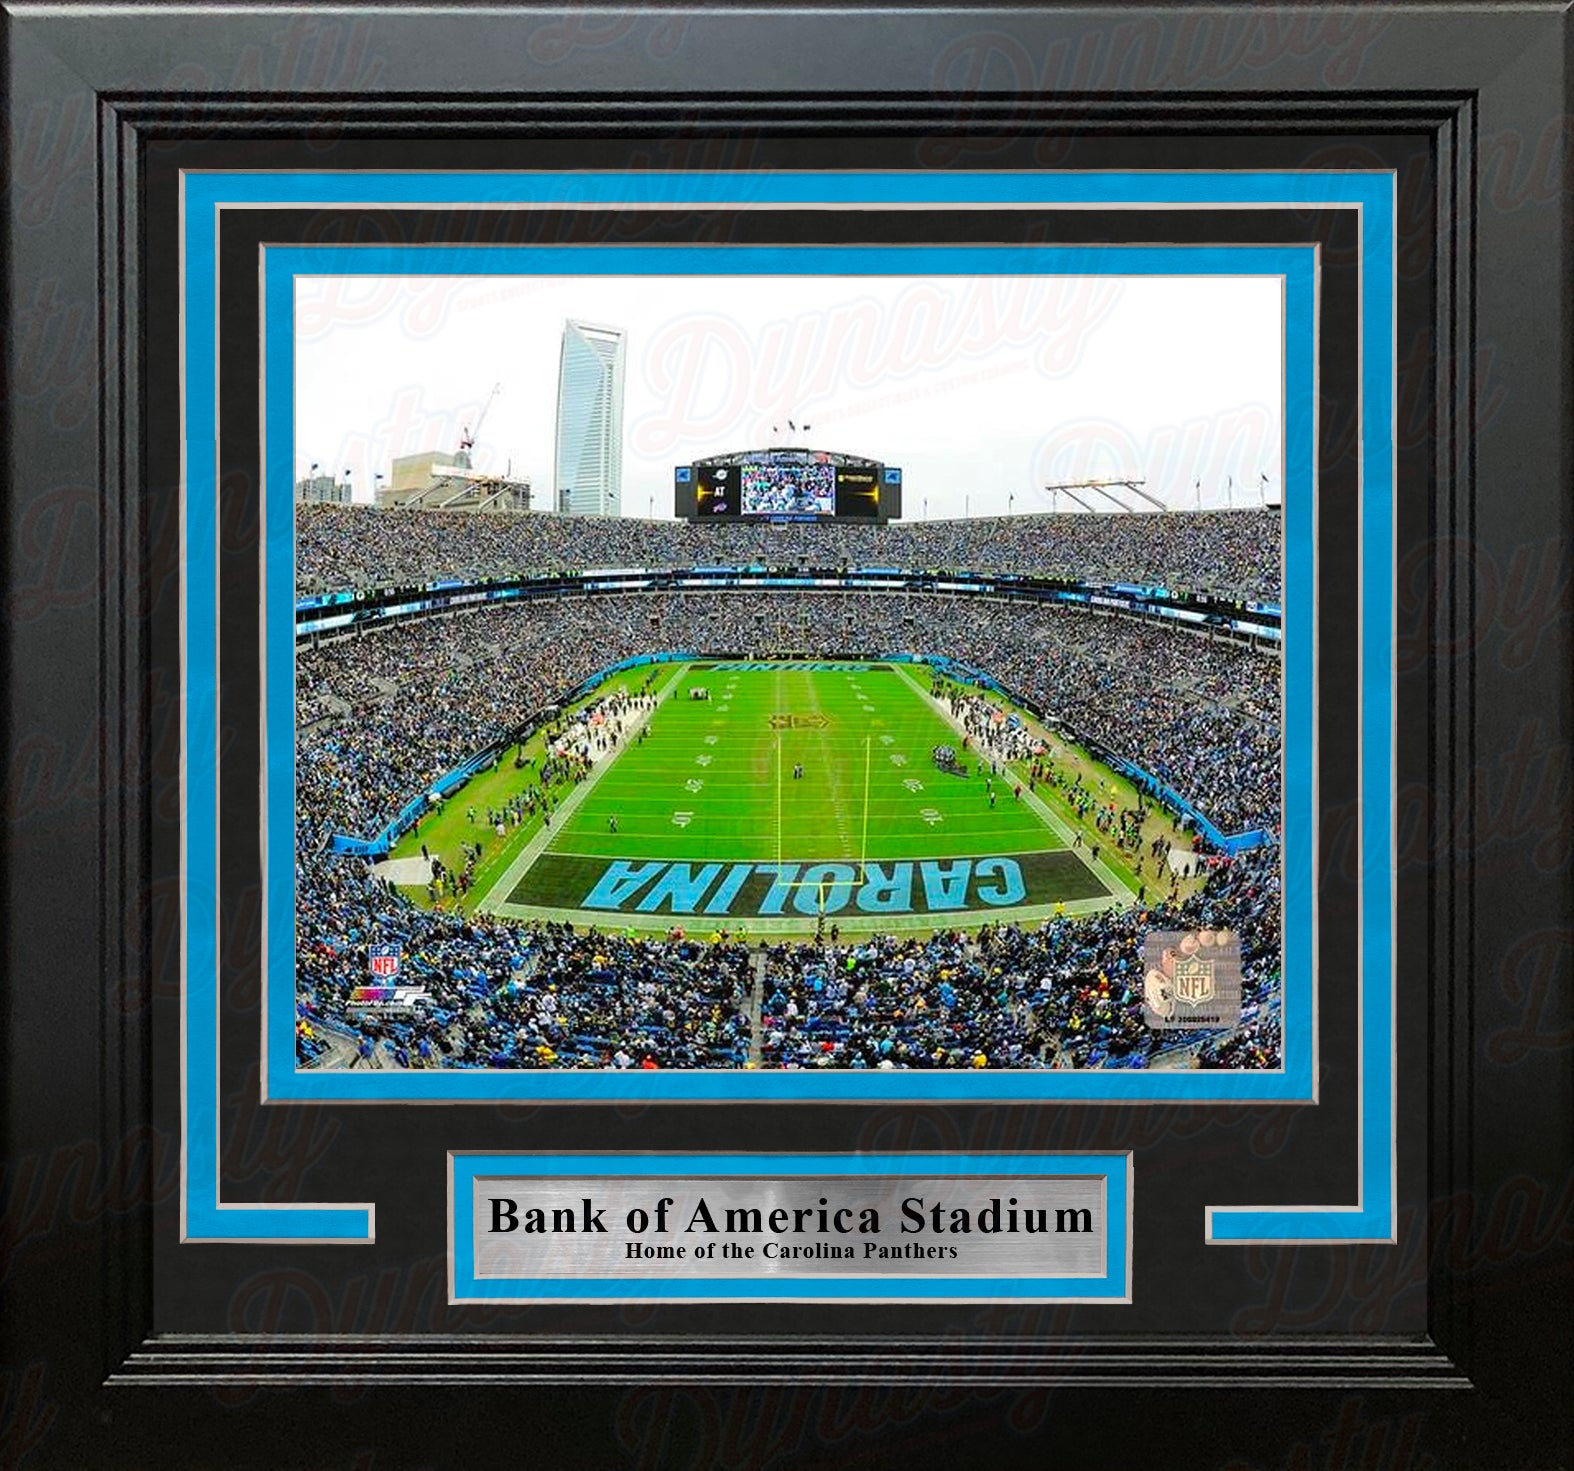 Carolina Panthers Bank of America Stadium NFL Football 8" x 10" Framed and Matted Photo - Dynasty Sports & Framing 